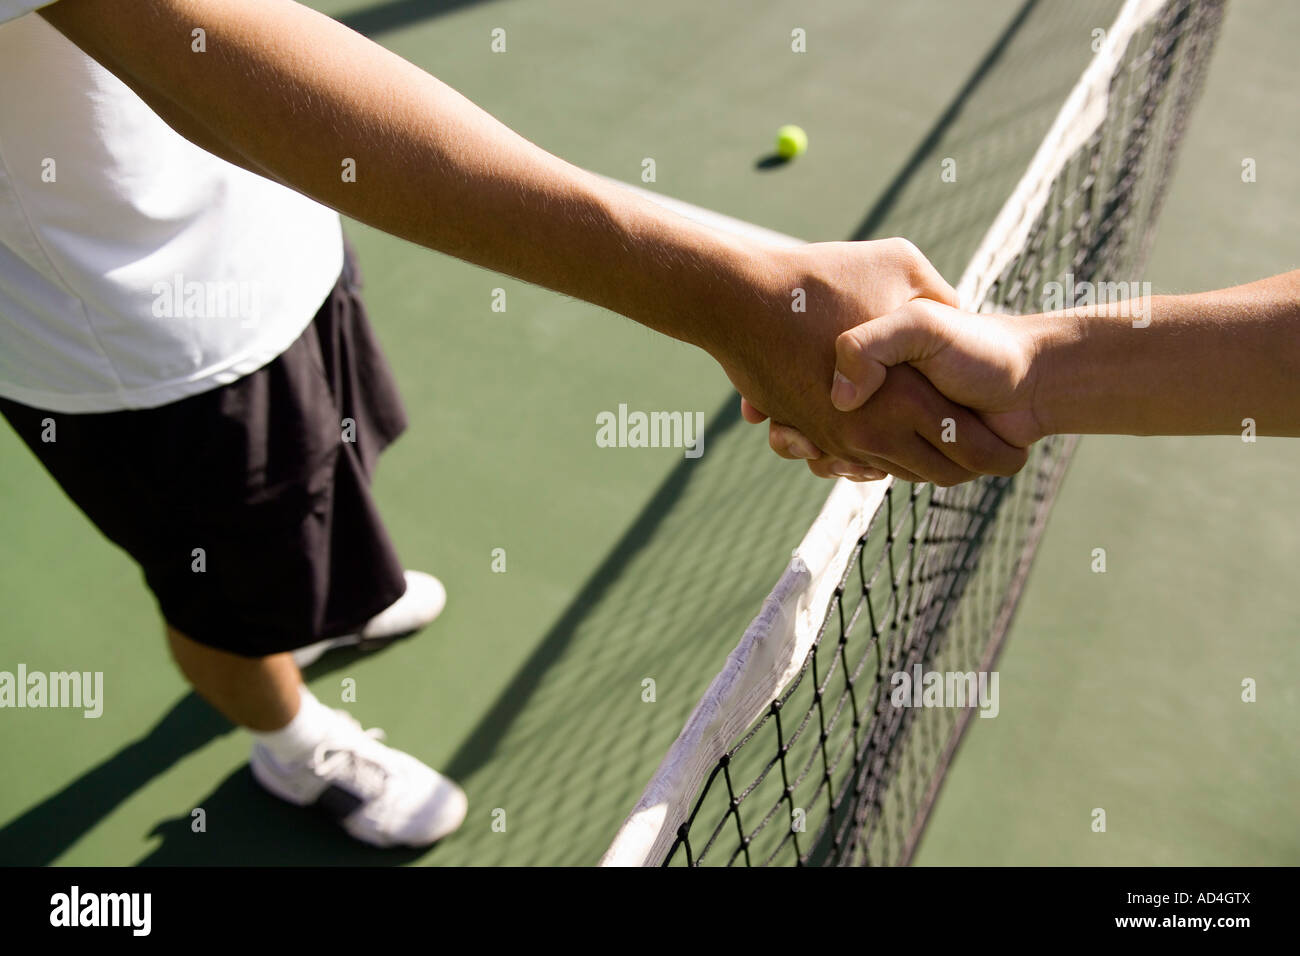 Two tennis players shake hands across the net Stock Photo